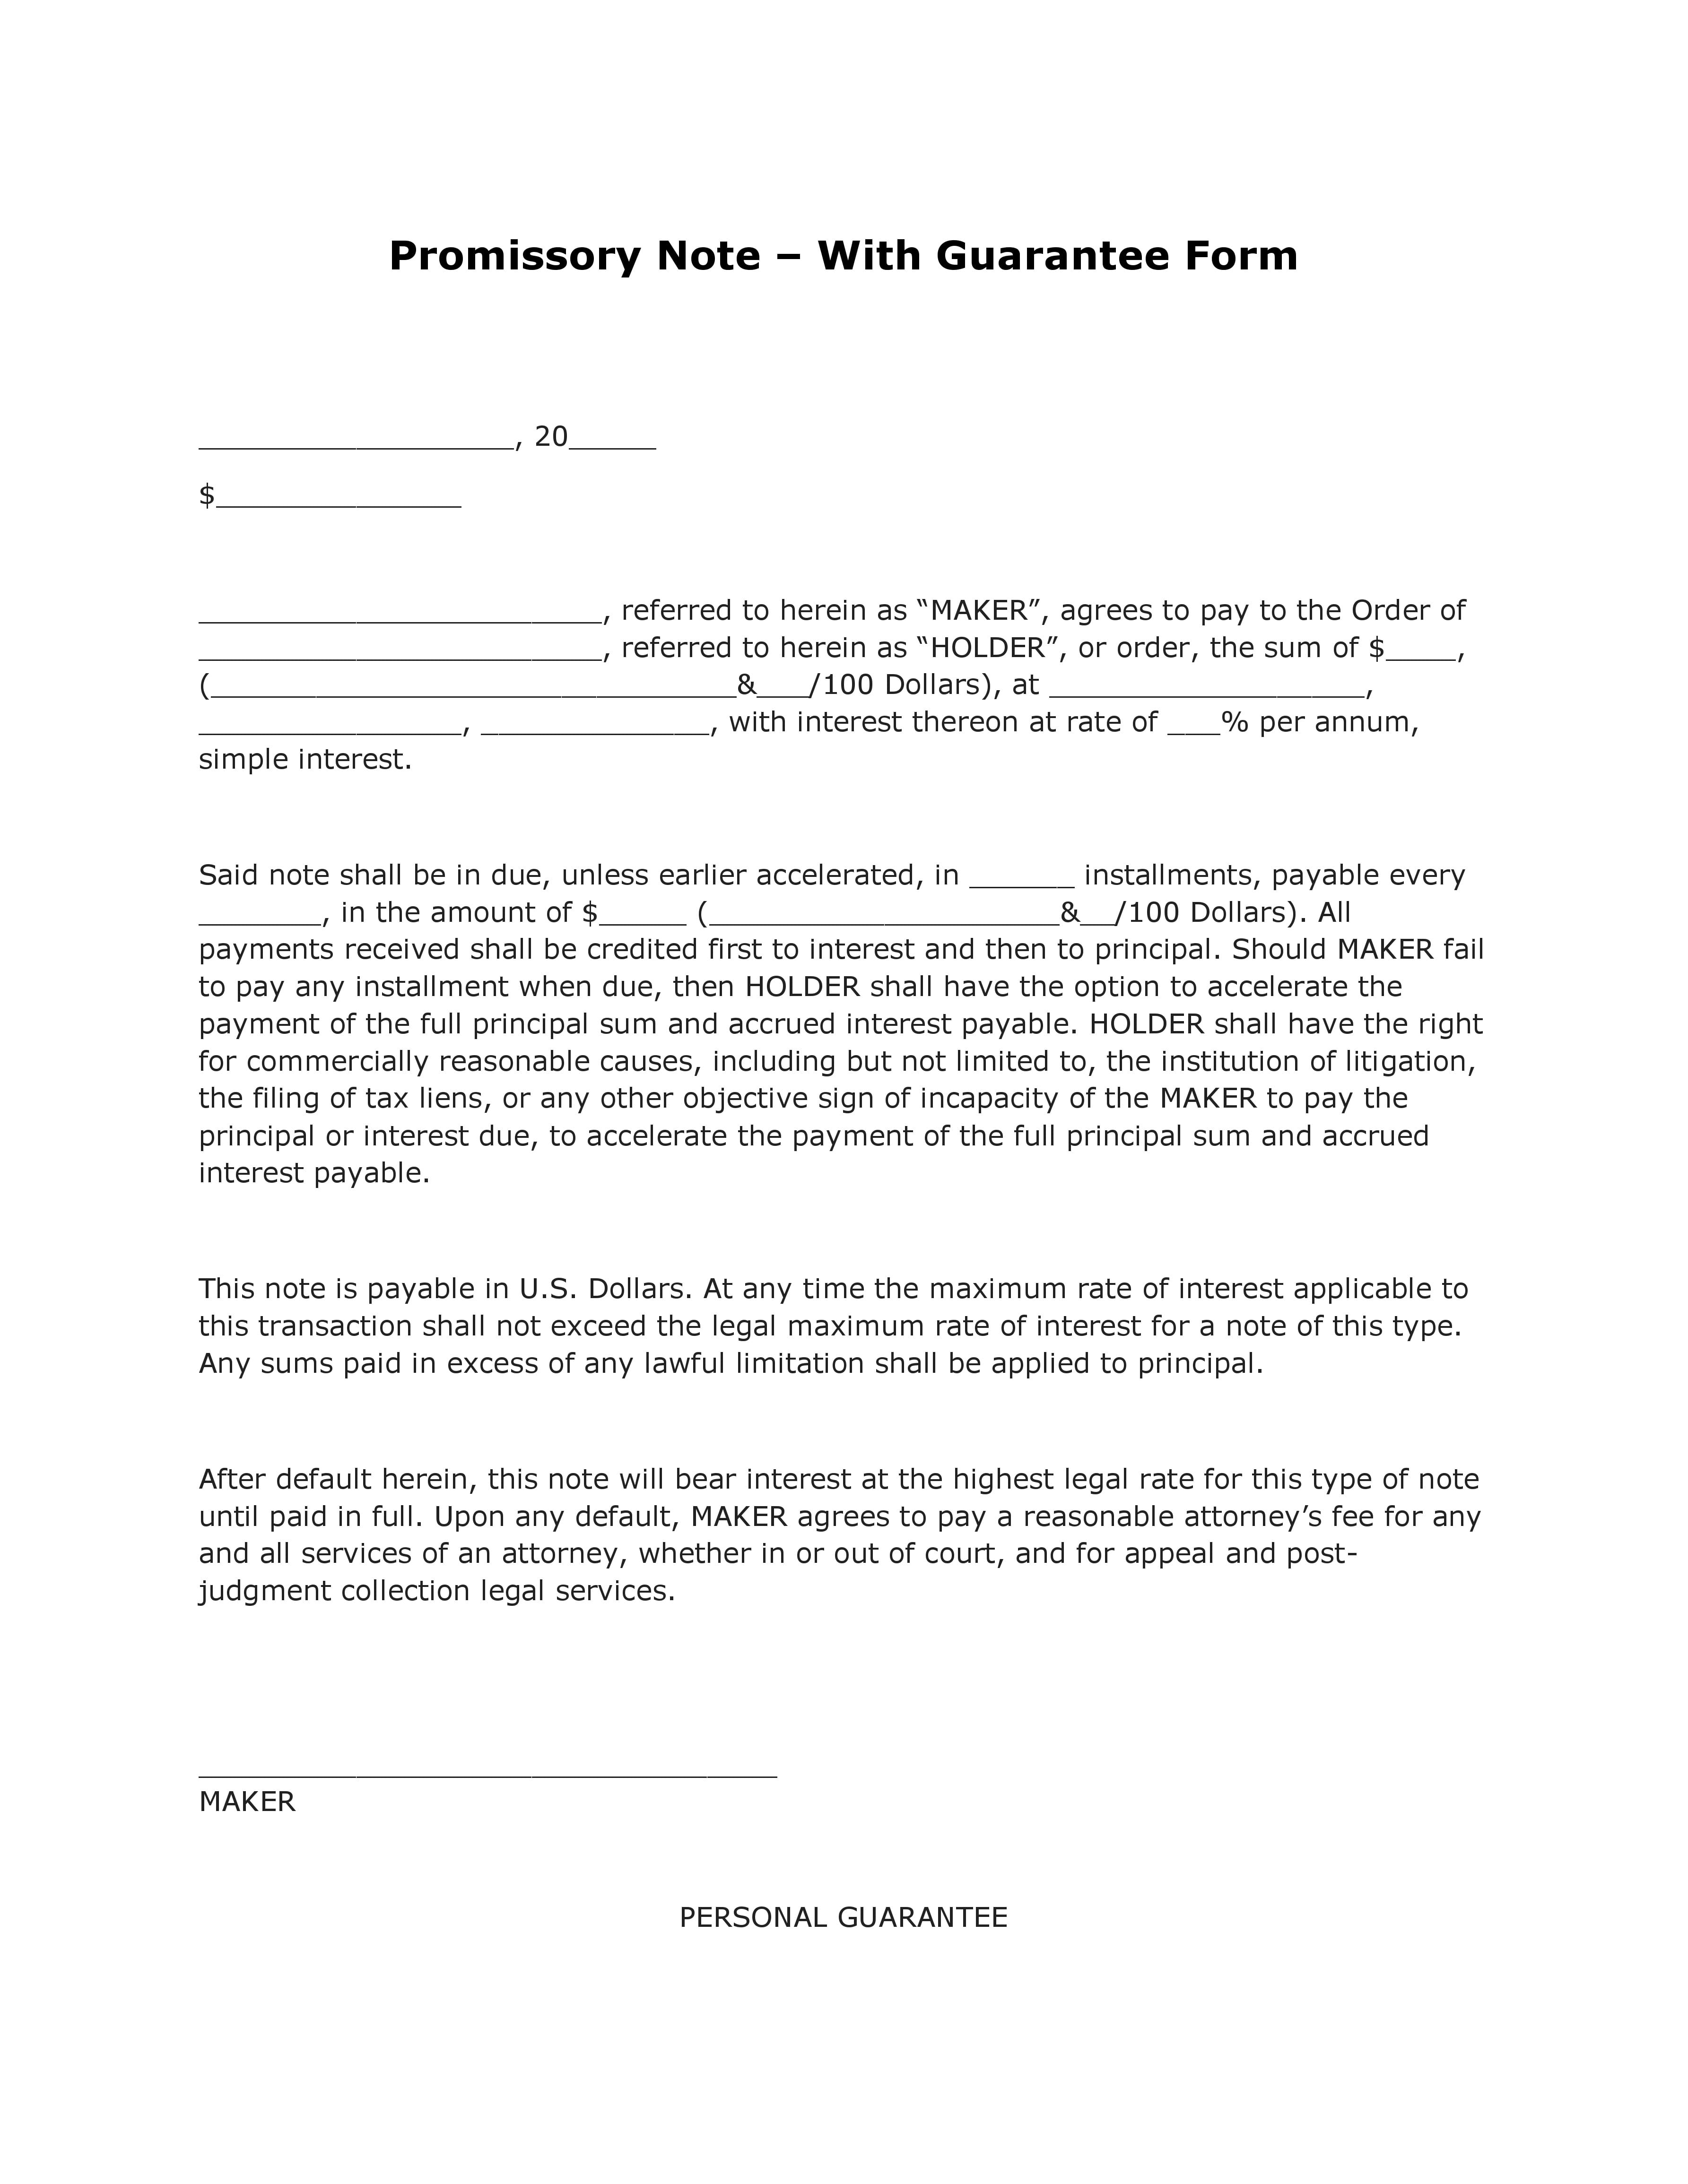 Free Promissory Note – With Guarantee Form - PDF Template - Form Inside Simple Interest Promissory Note Template